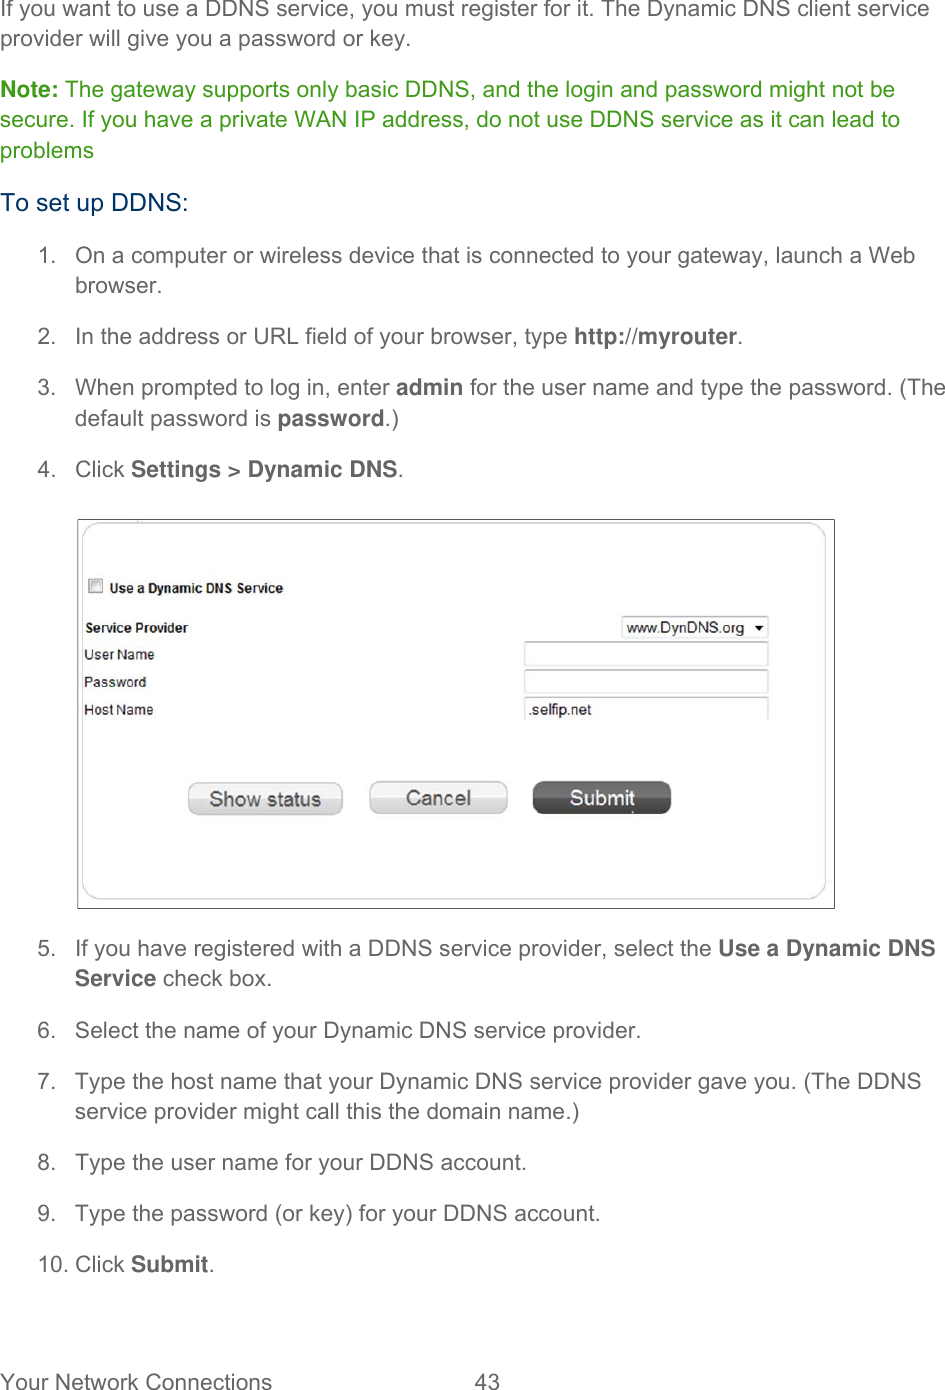 Your Network Connections  43   If you want to use a DDNS service, you must register for it. The Dynamic DNS client service provider will give you a password or key. Note: The gateway supports only basic DDNS, and the login and password might not be secure. If you have a private WAN IP address, do not use DDNS service as it can lead to problems To set up DDNS: 1.  On a computer or wireless device that is connected to your gateway, launch a Web browser. 2.  In the address or URL field of your browser, type http://myrouter.  3.  When prompted to log in, enter admin for the user name and type the password. (The default password is password.) 4. Click Settings &gt; Dynamic DNS.   5.  If you have registered with a DDNS service provider, select the Use a Dynamic DNS Service check box. 6.  Select the name of your Dynamic DNS service provider.  7.  Type the host name that your Dynamic DNS service provider gave you. (The DDNS service provider might call this the domain name.) 8.  Type the user name for your DDNS account. 9.  Type the password (or key) for your DDNS account. 10. Click Submit.  